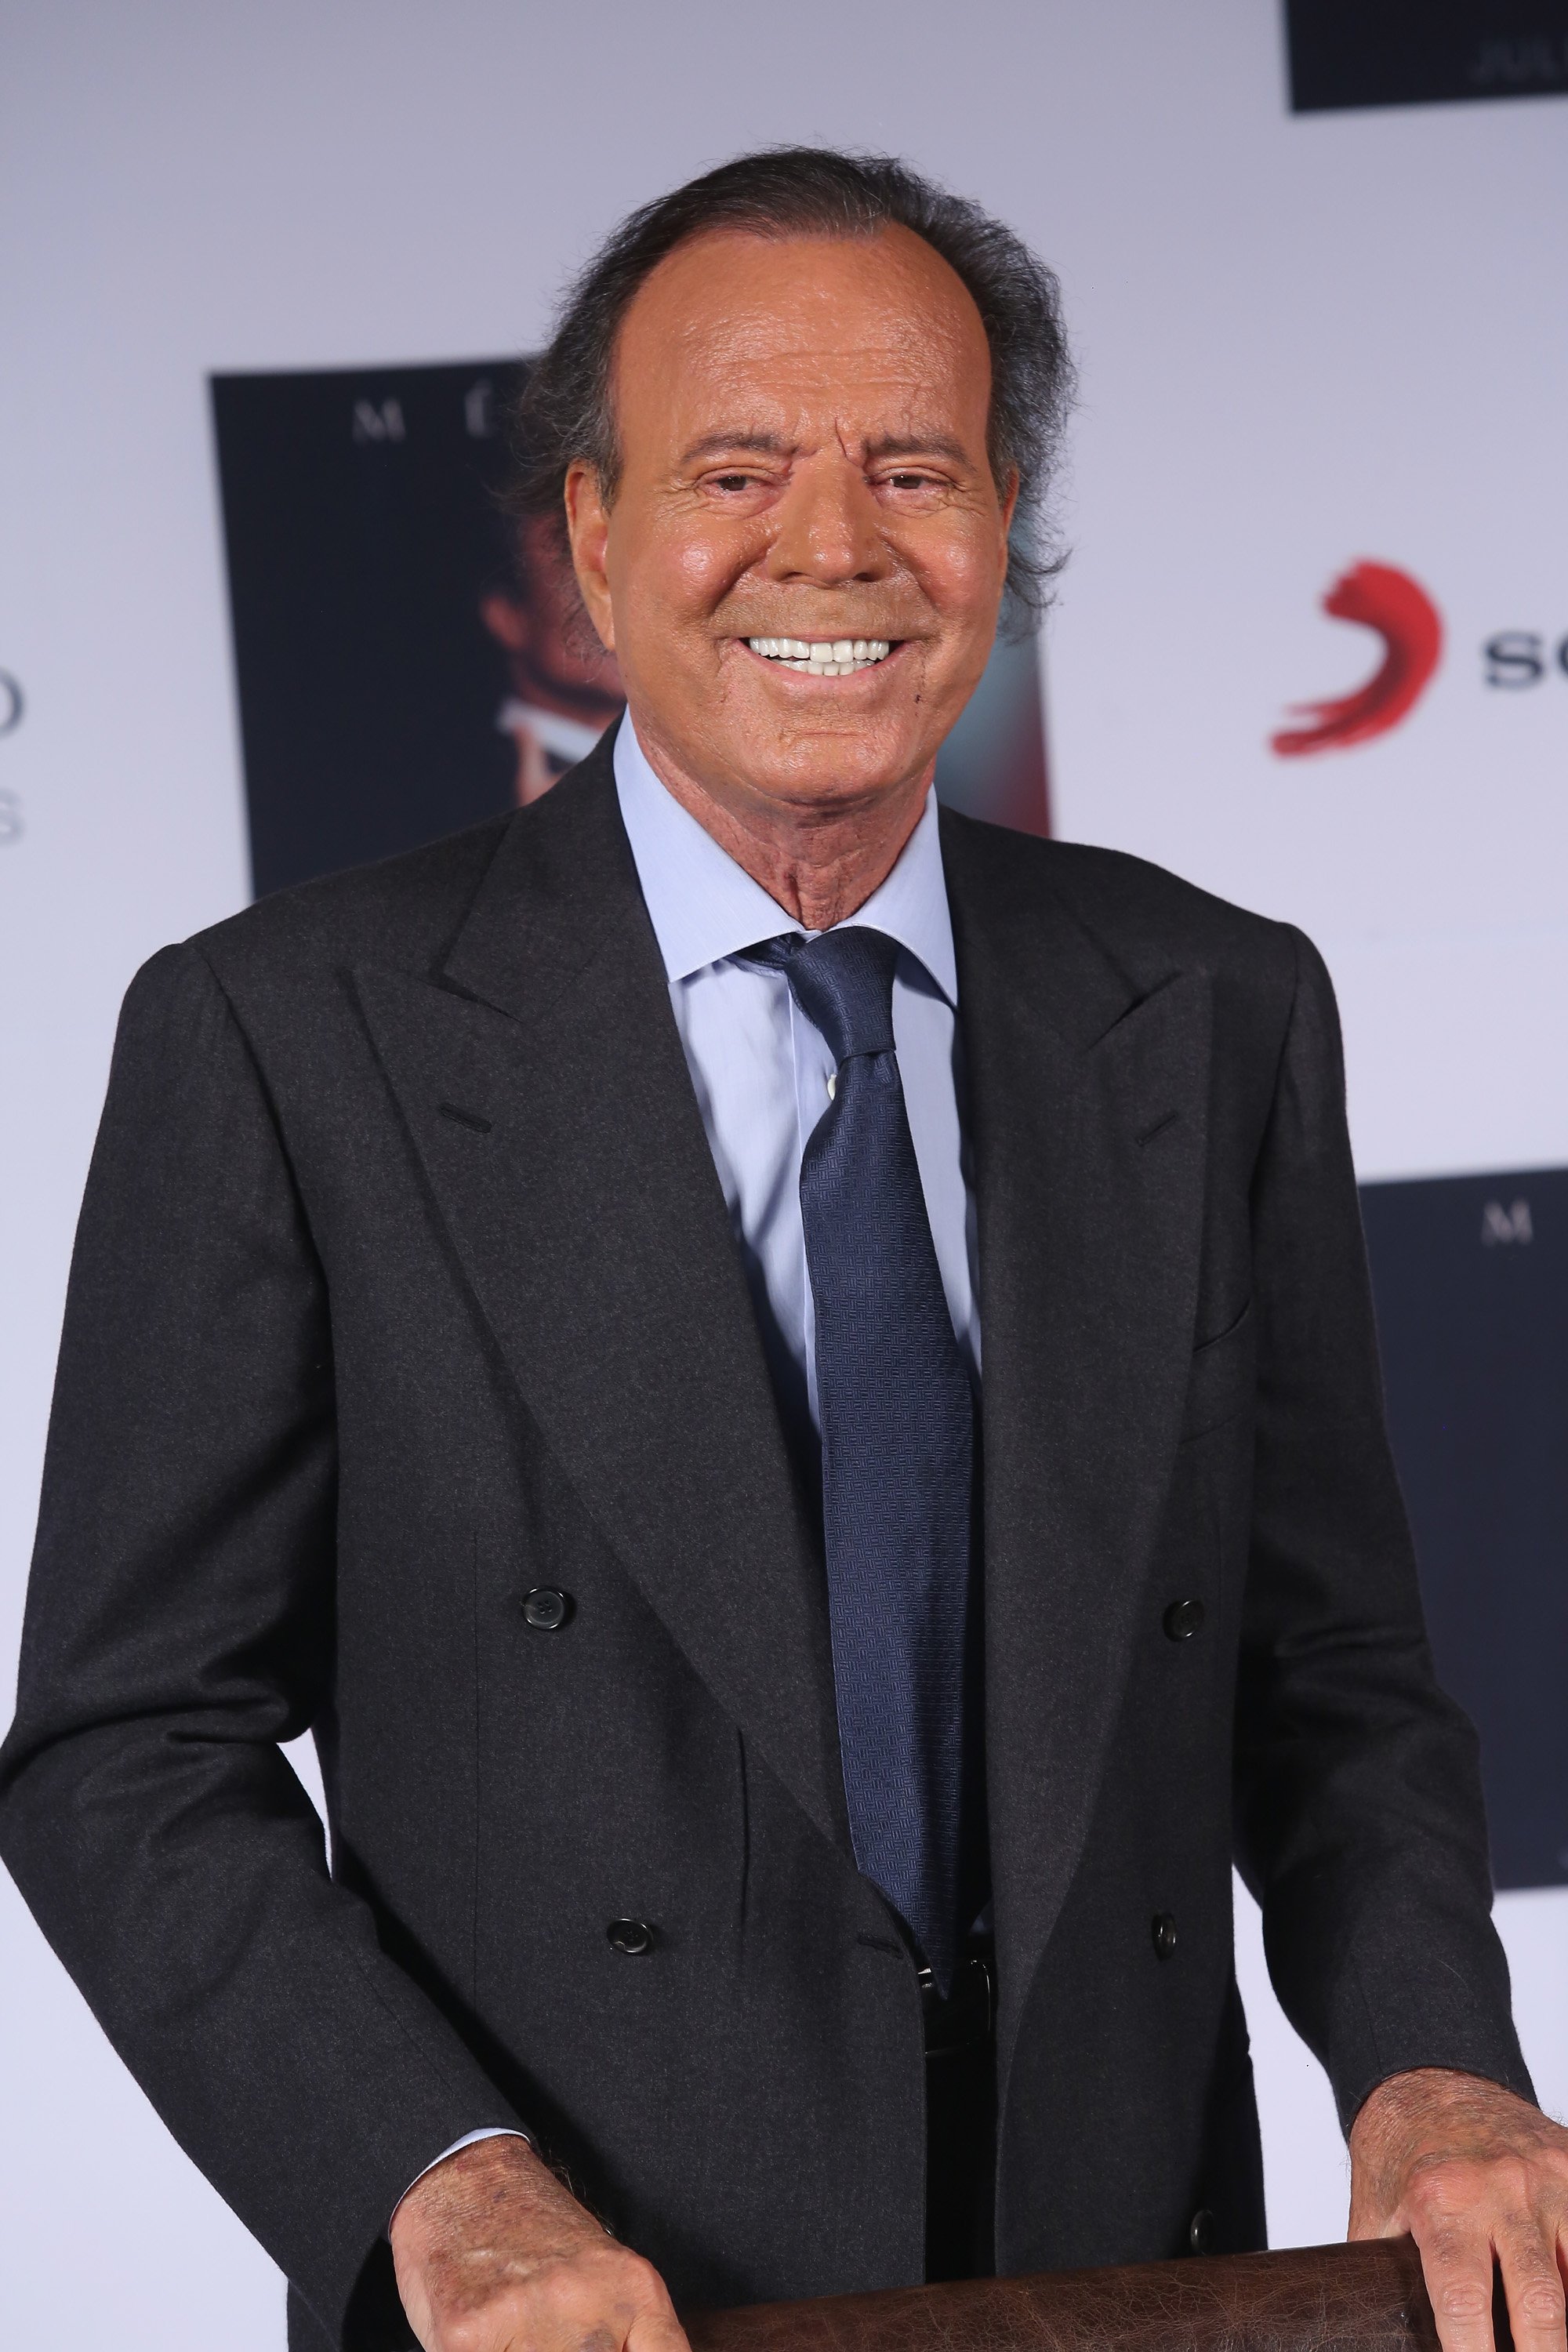 Julio Iglesias at a photocall and press conference for his album "Mexico" in Mexico City on September 23, 2015 | Source: Getty Images